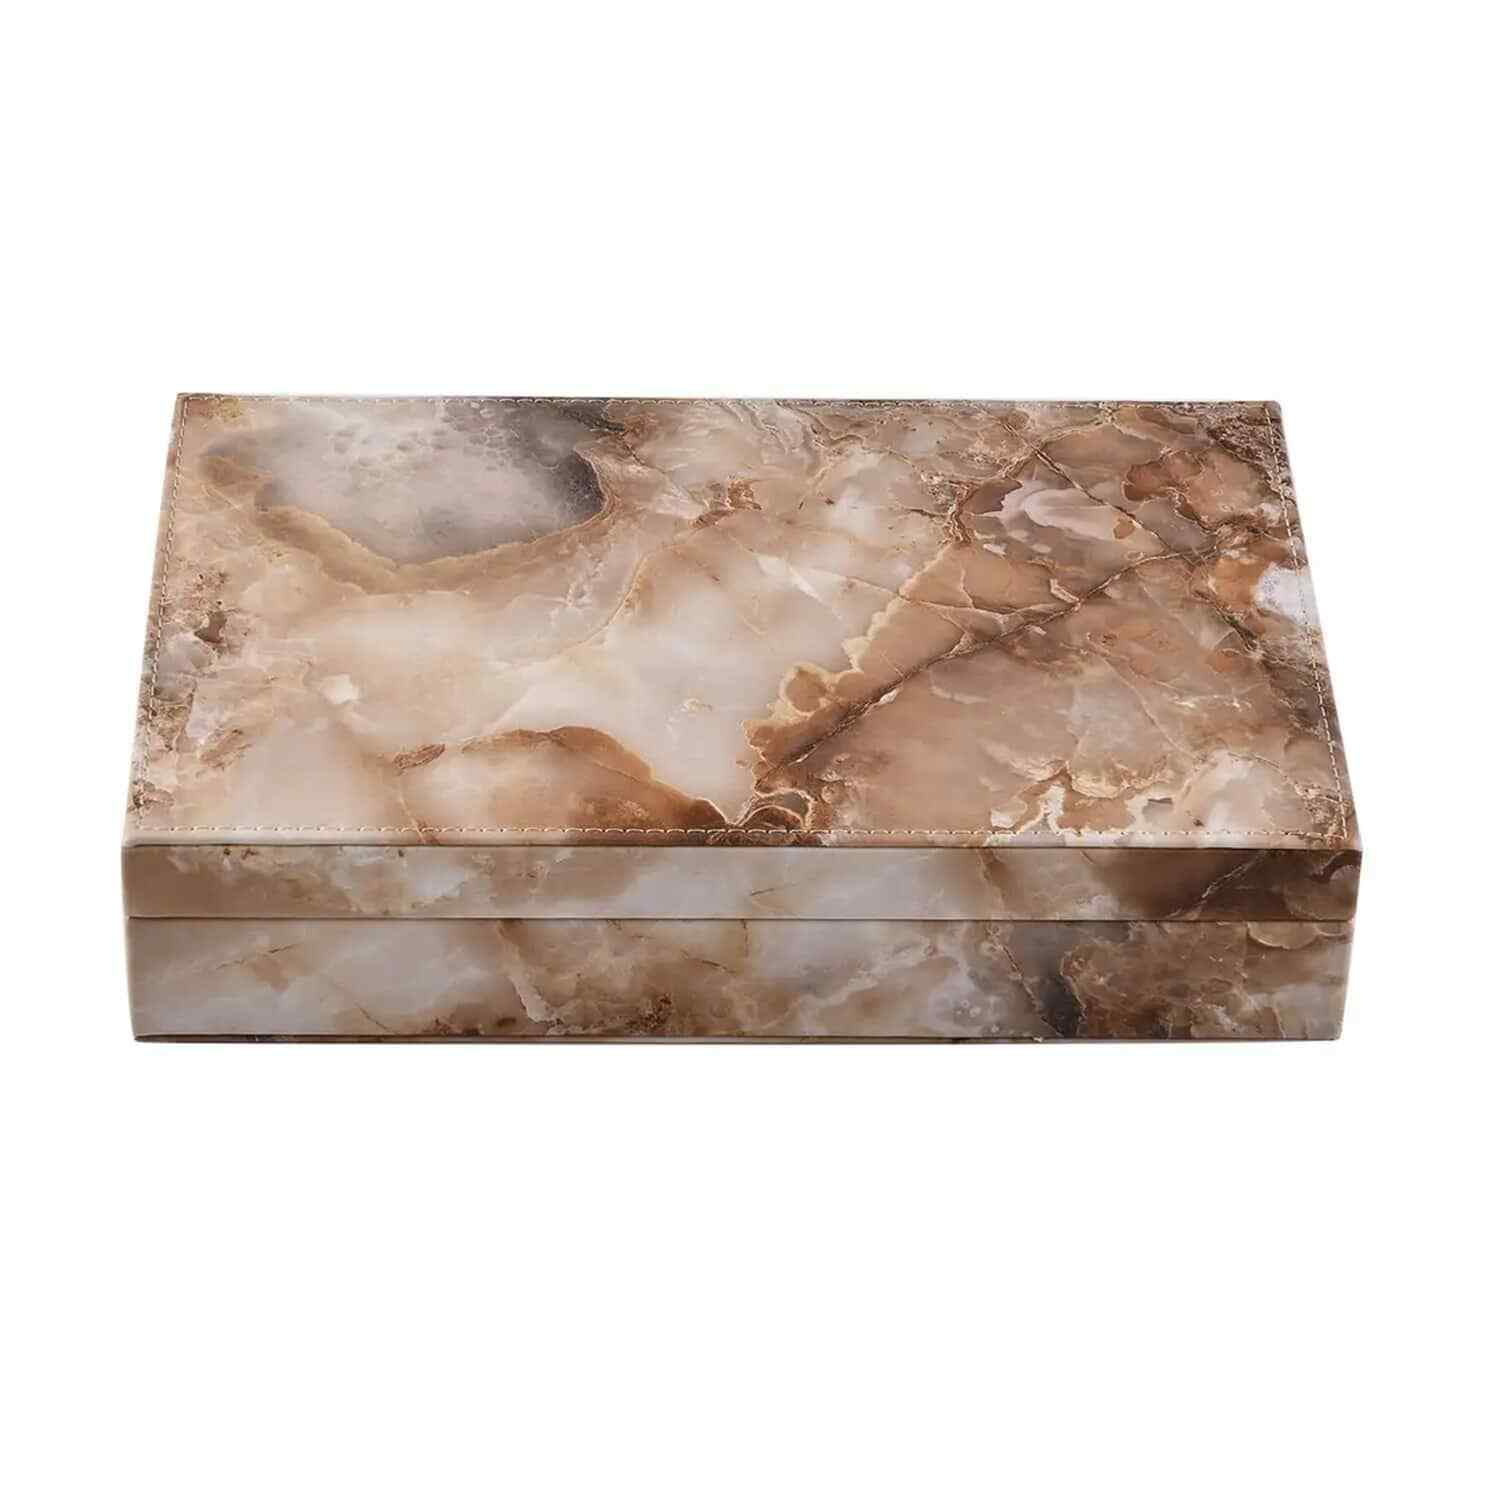 Jewelry Box Light Brown Marble pattern Faux Leather with Anti Tarnish Lining